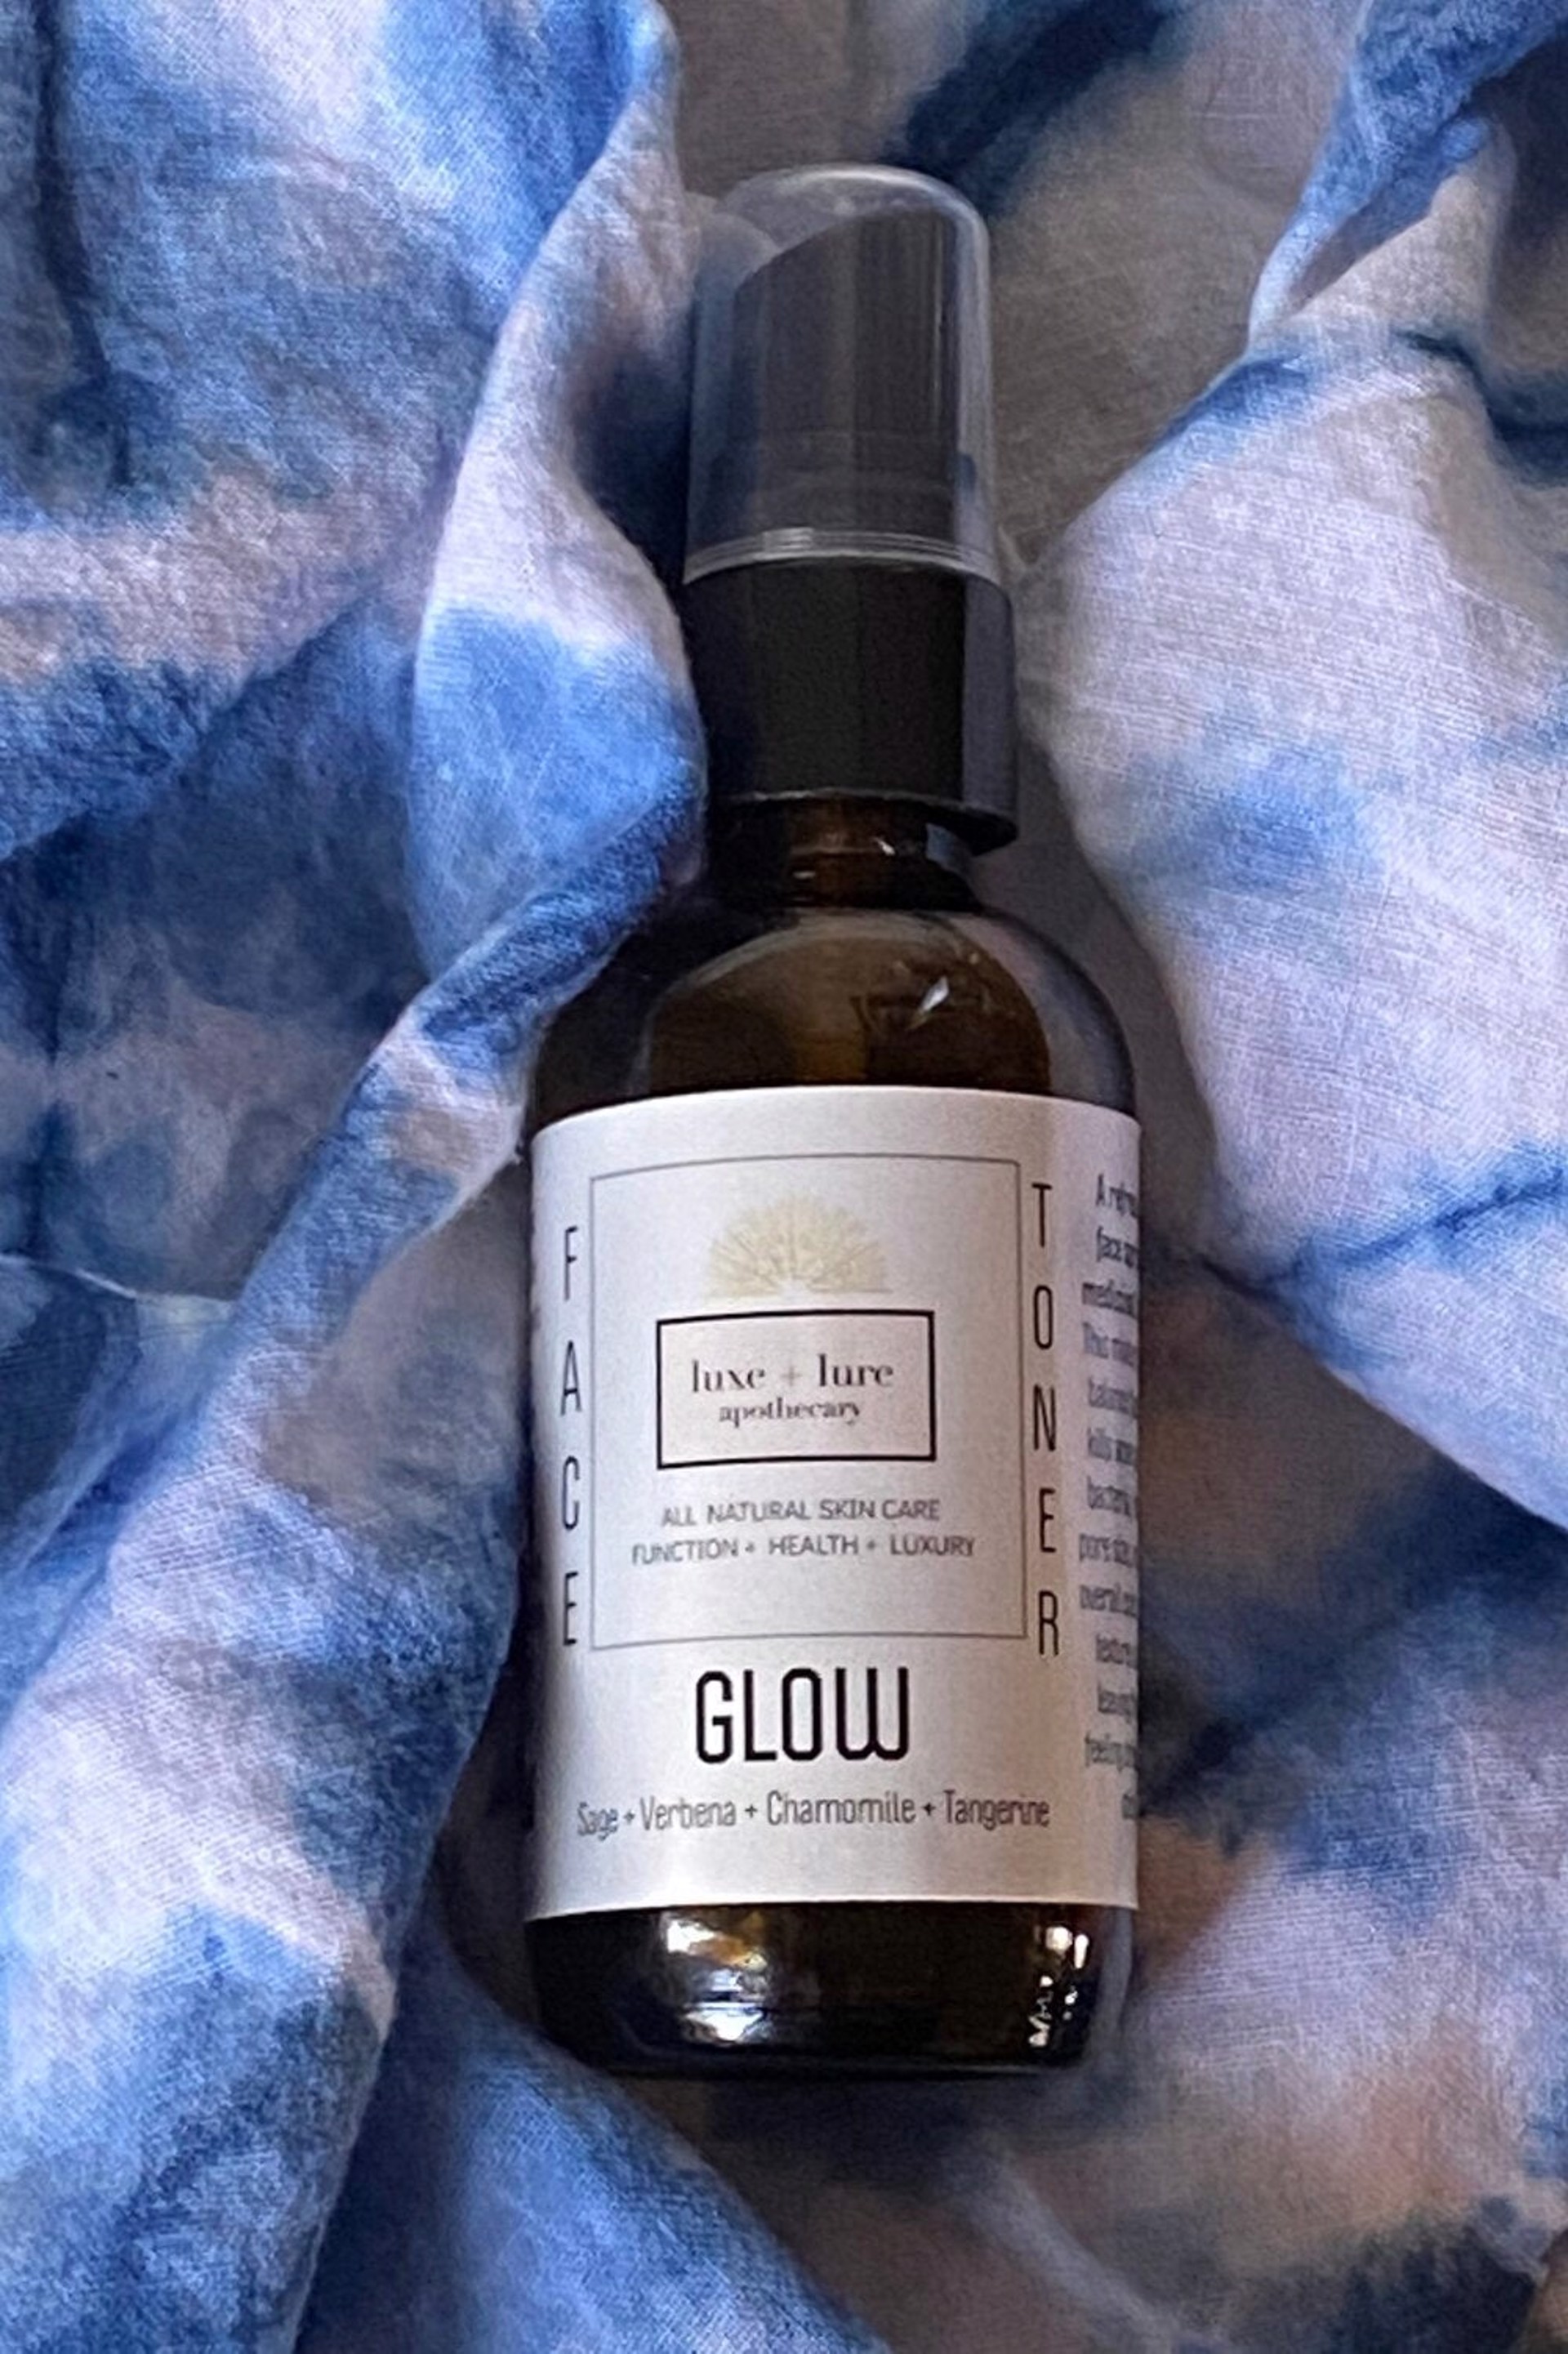 Glow Face Toner by Luxe + Lure Apothecary